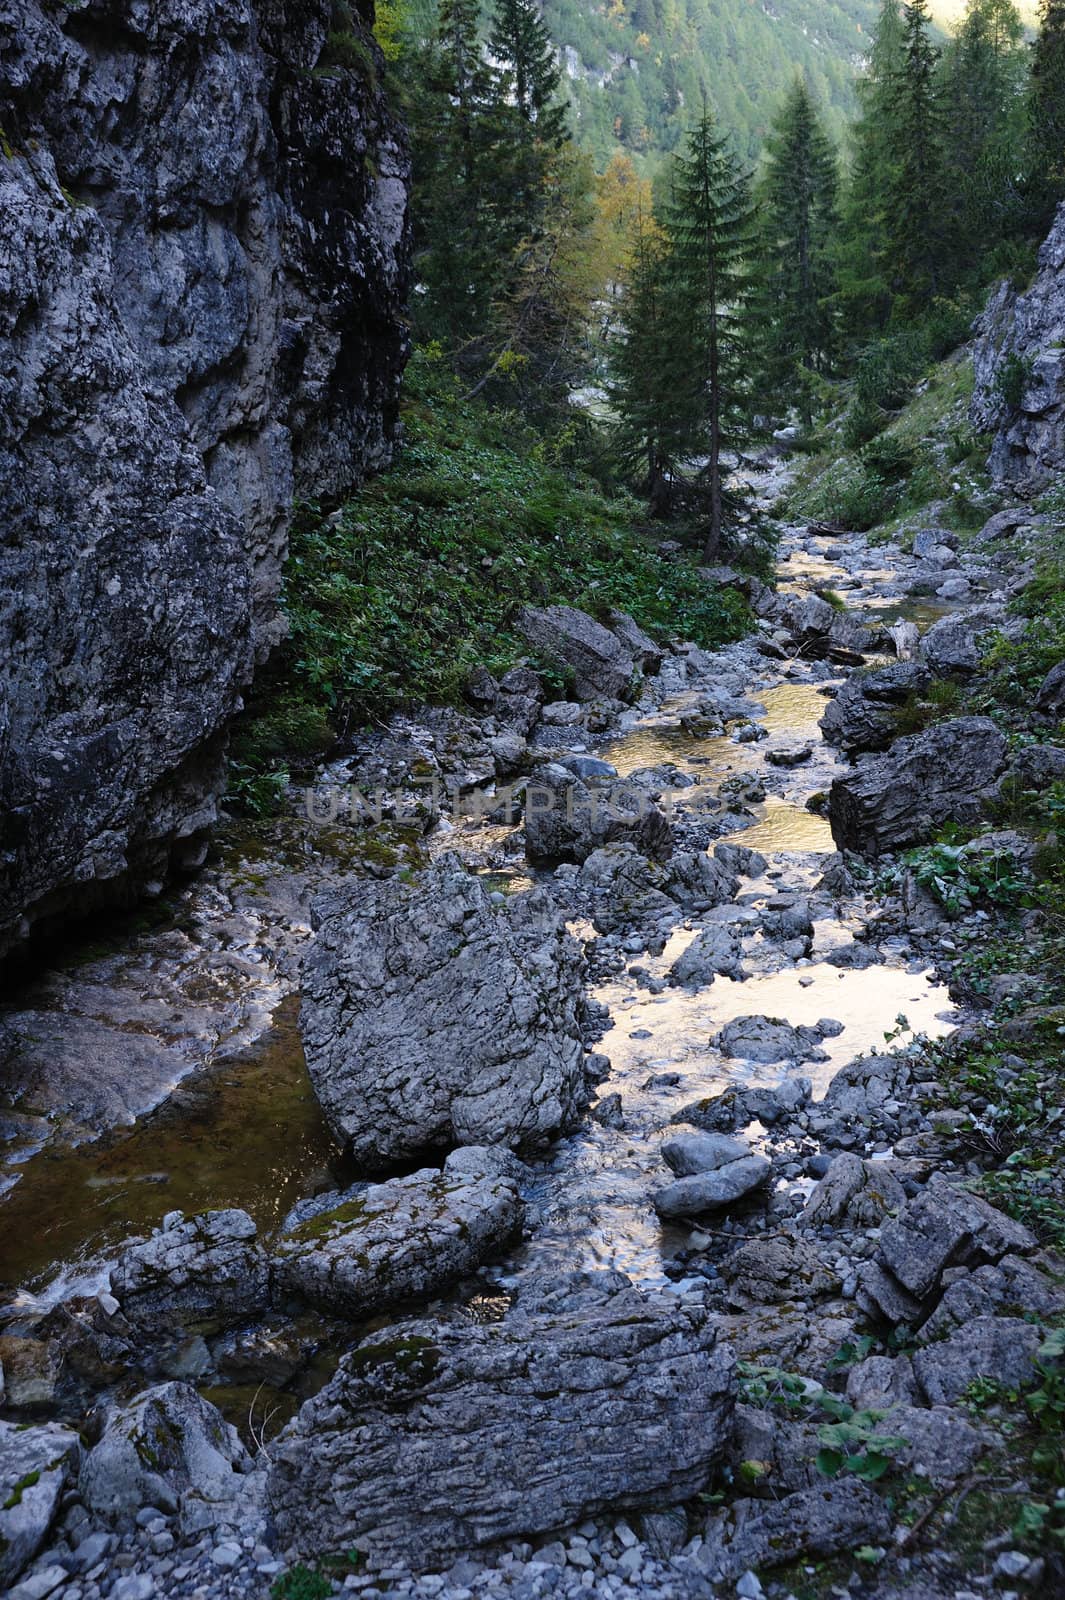 An image of a stream in the mountains